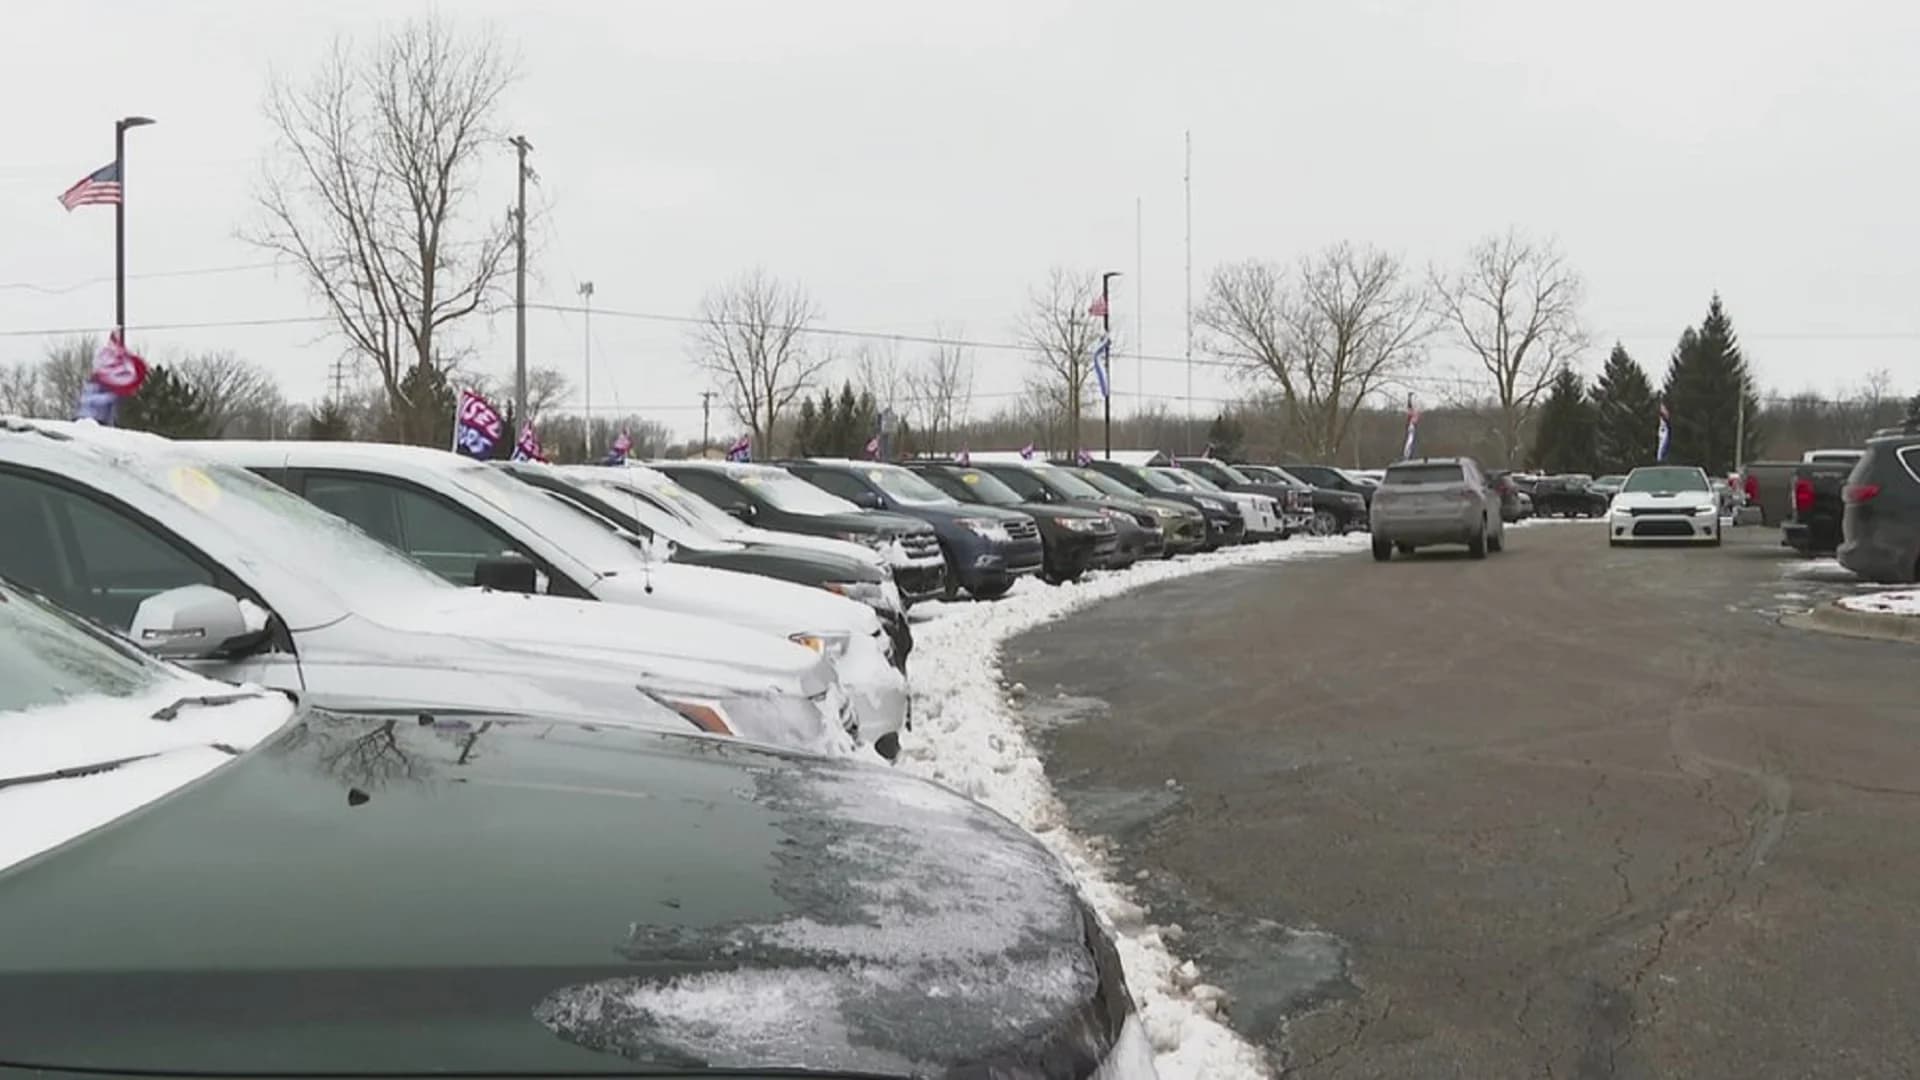 New or used? Either way, price hikes squeeze US auto buyers